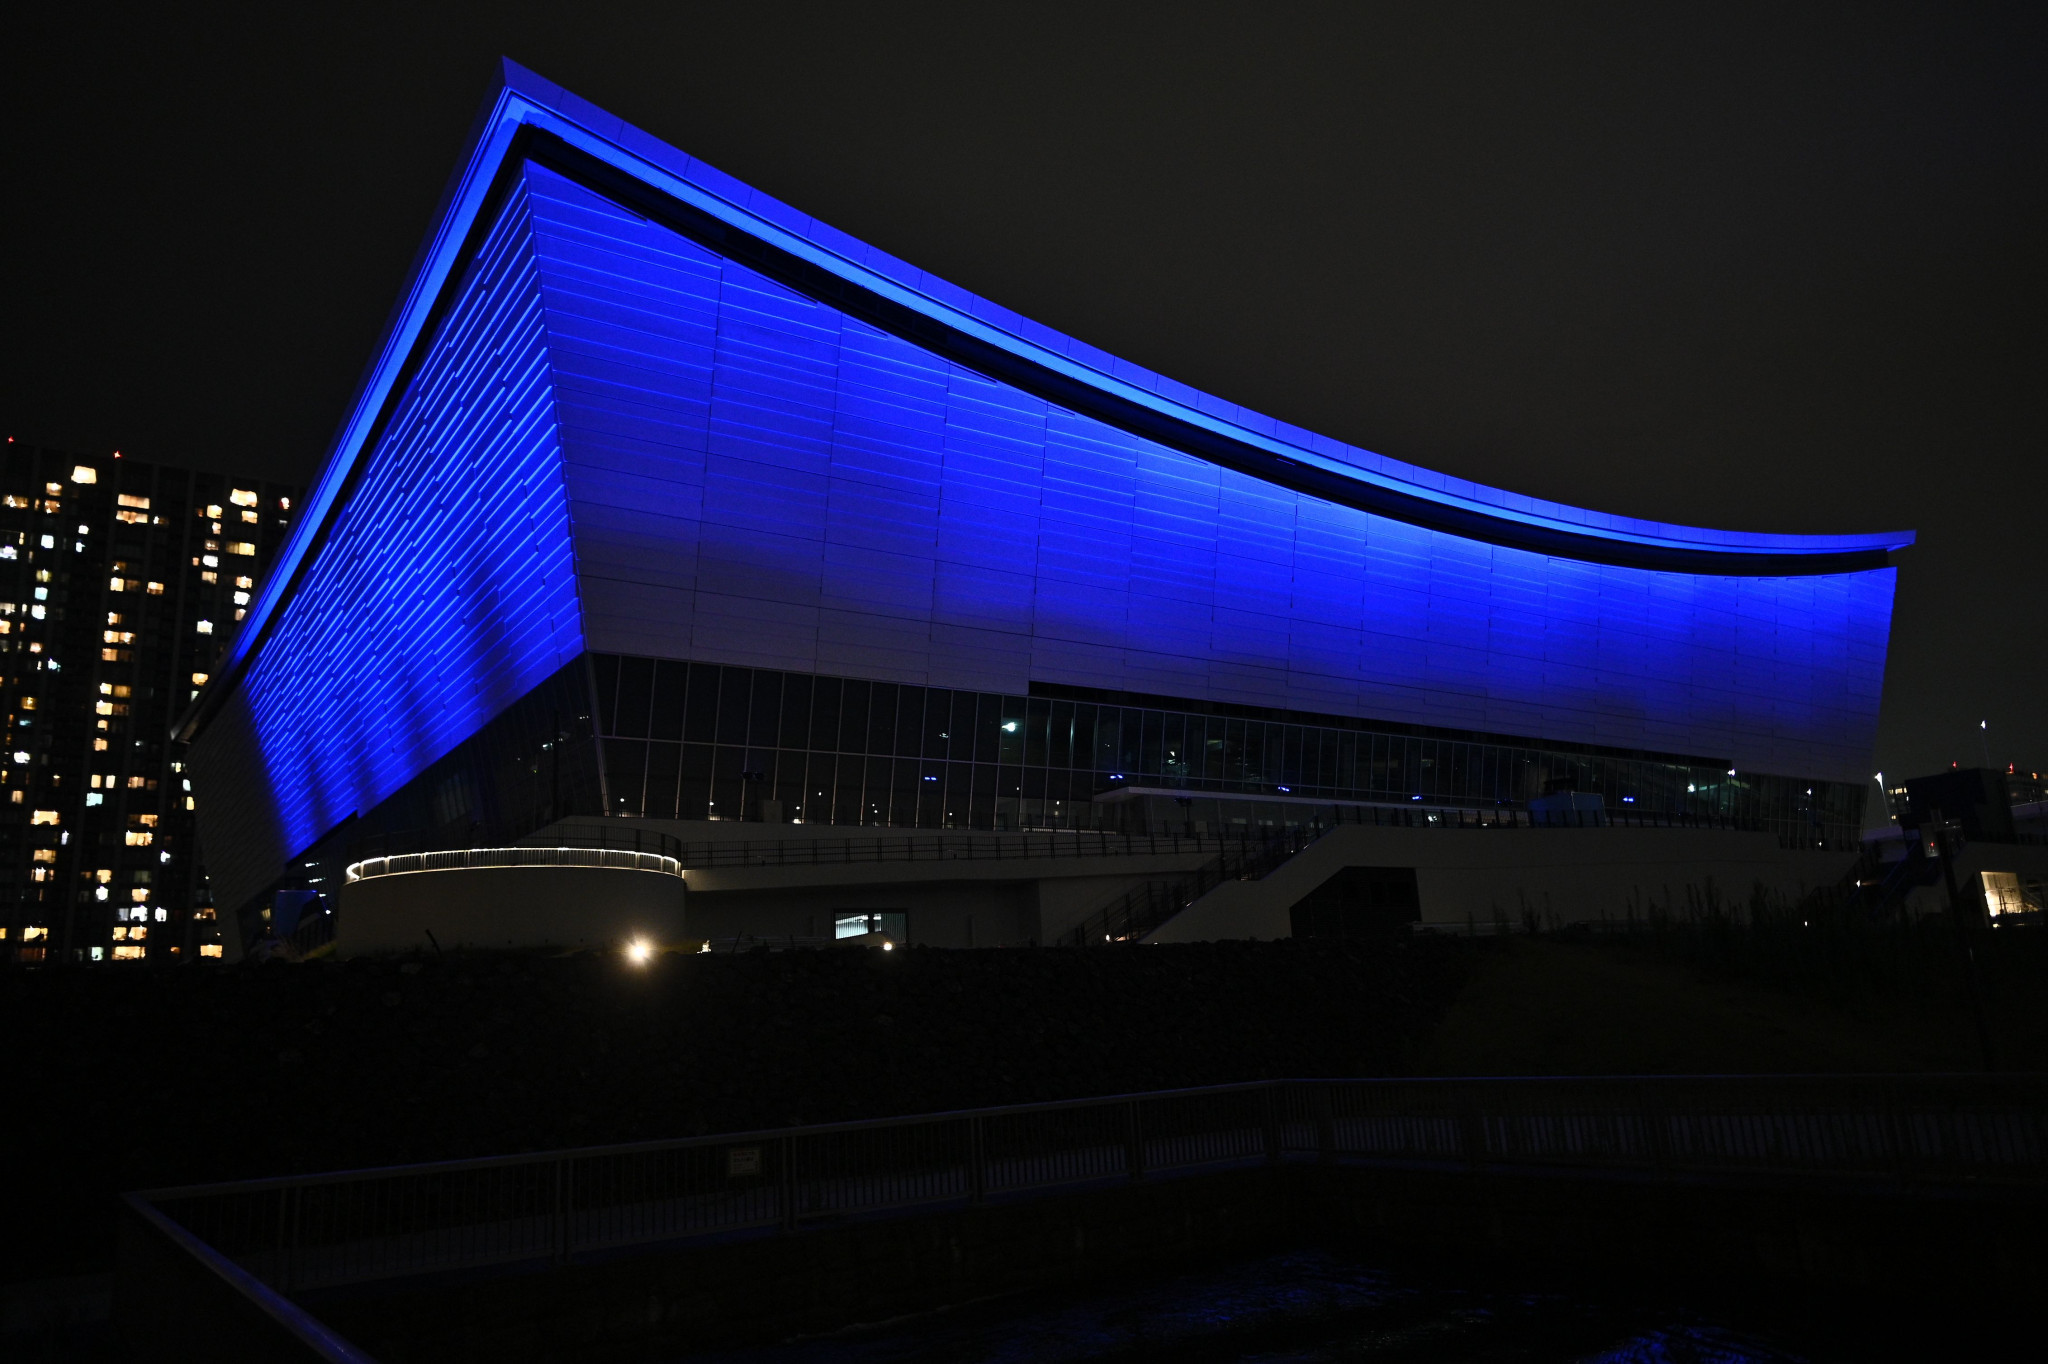 The Ariake Arena was one of the Tokyo 2020 venues which was lit up in blue to mark the milestone ©Tokyo 2020